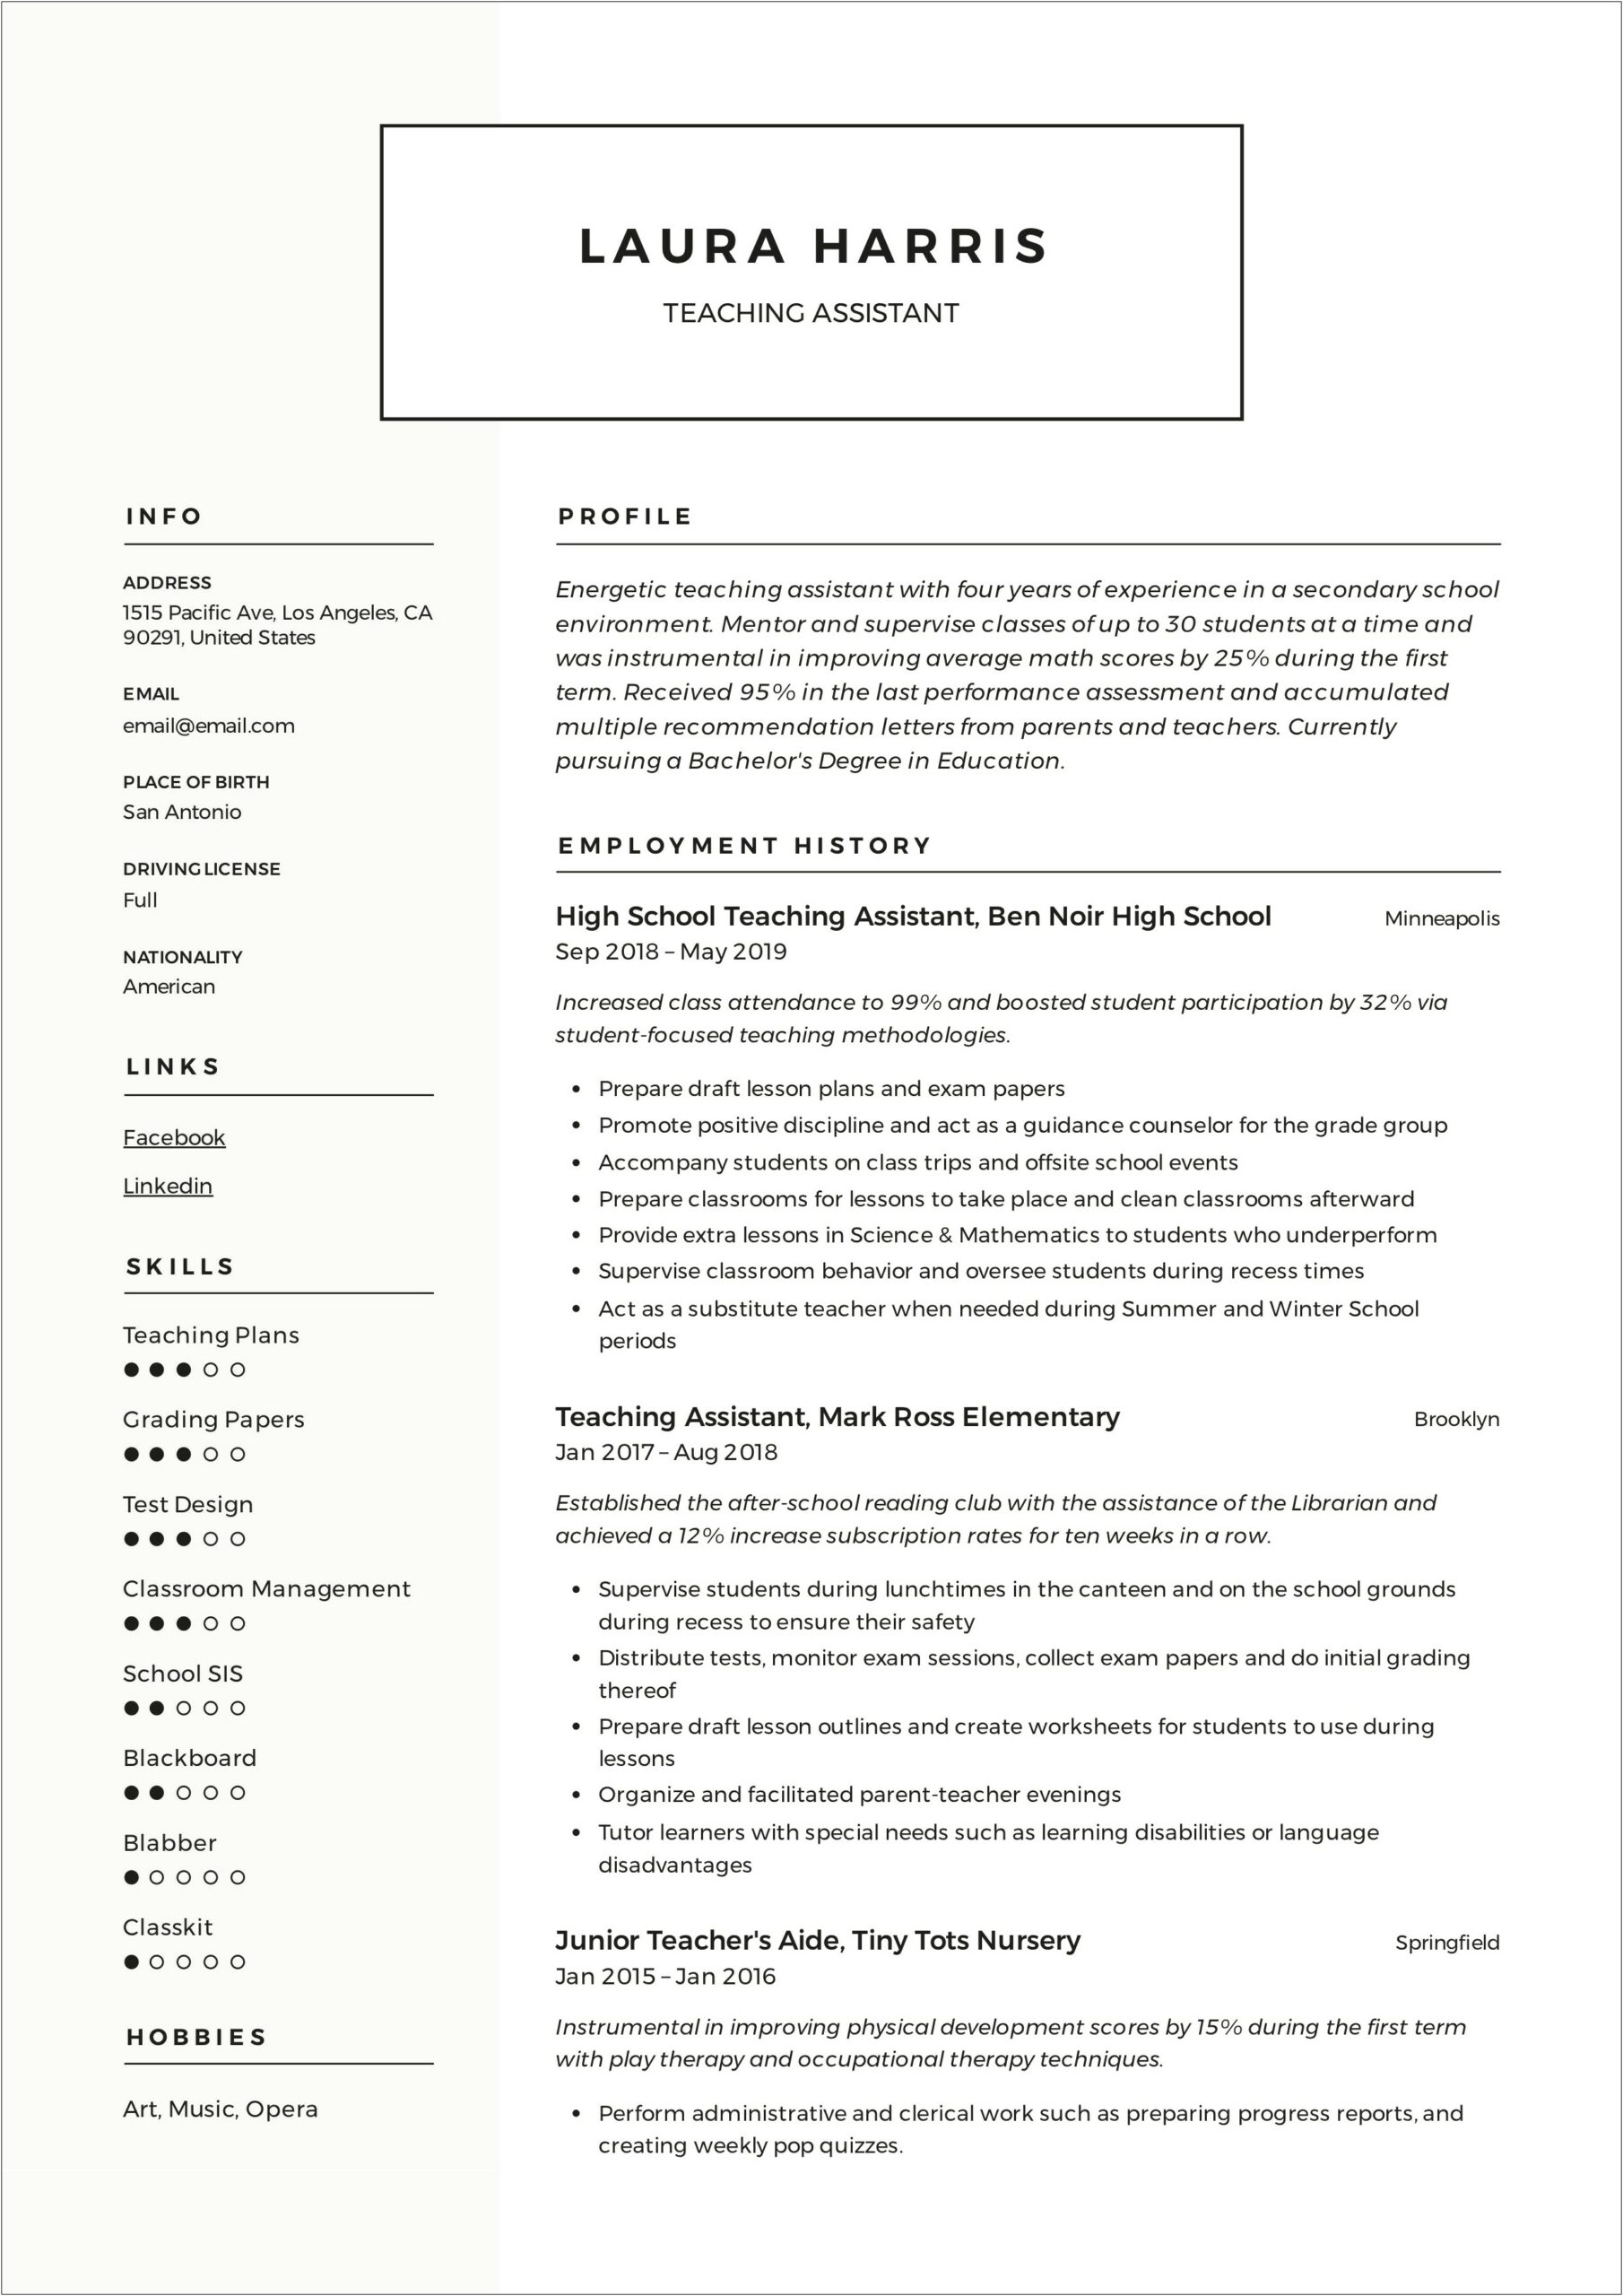 Work Experience As Teaching Assistant Resume